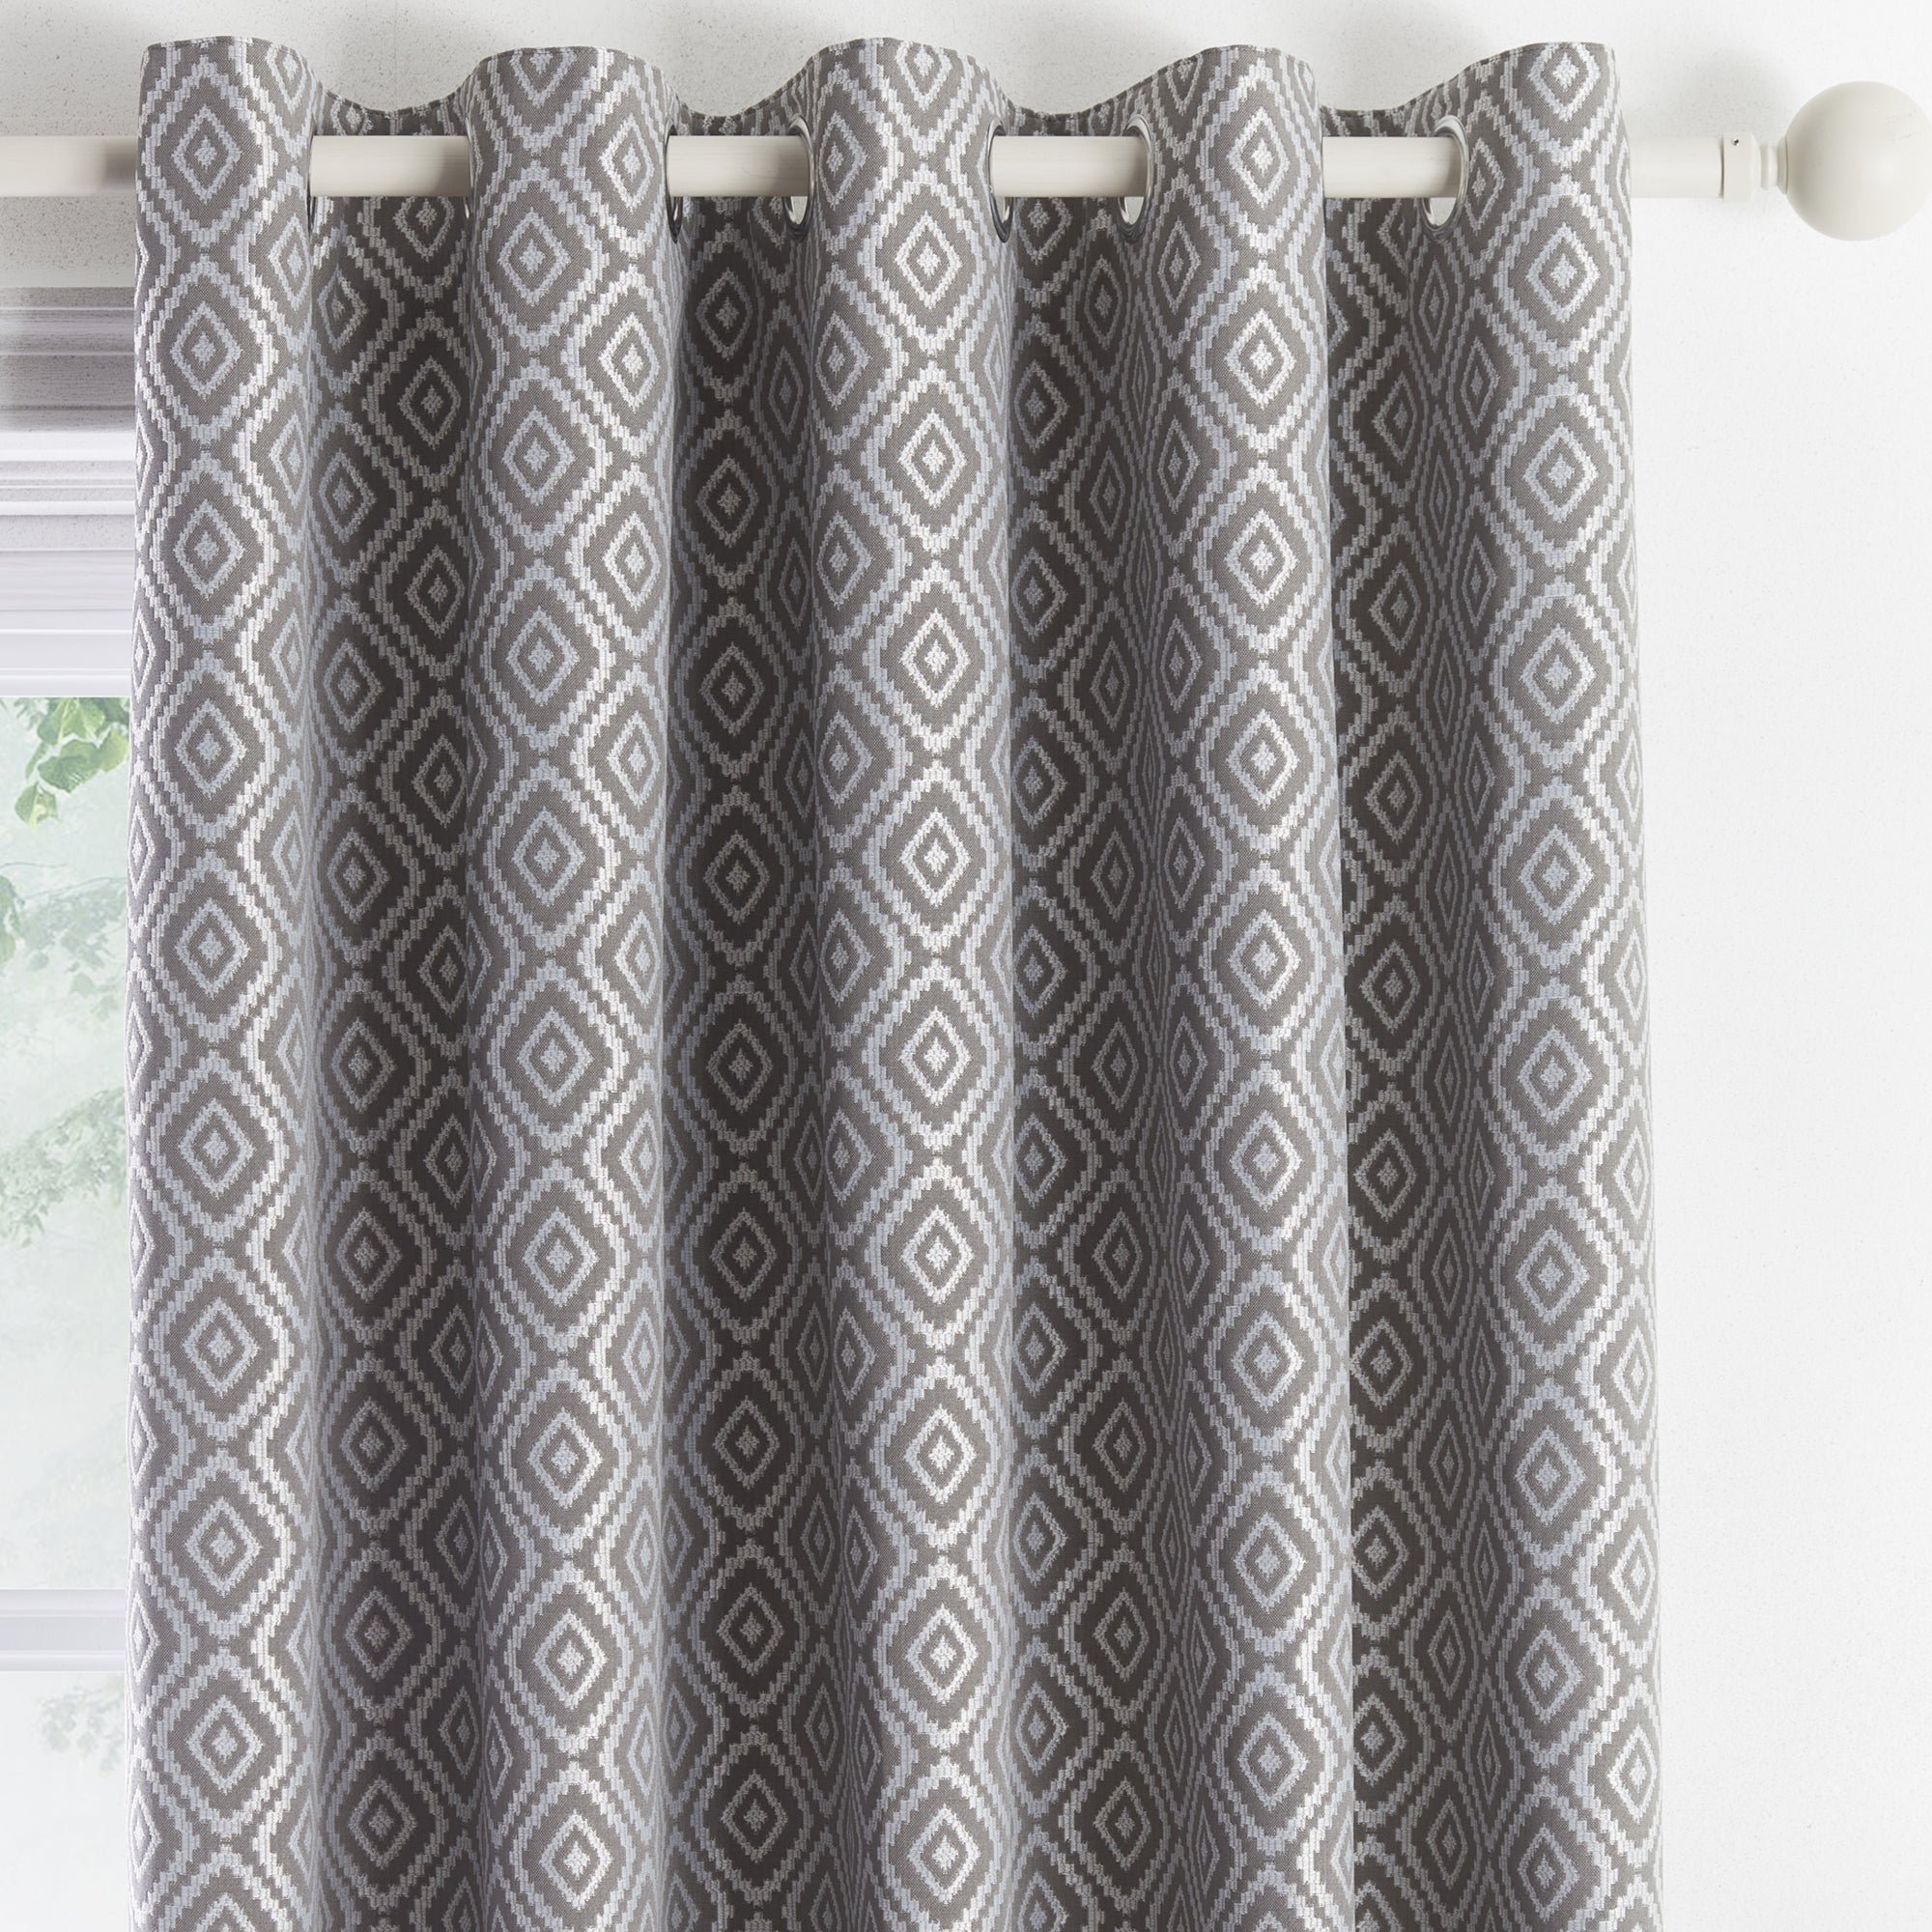 Asha - Jacquard Pair of Eyelet Curtains in Slate - By Appletree Loft